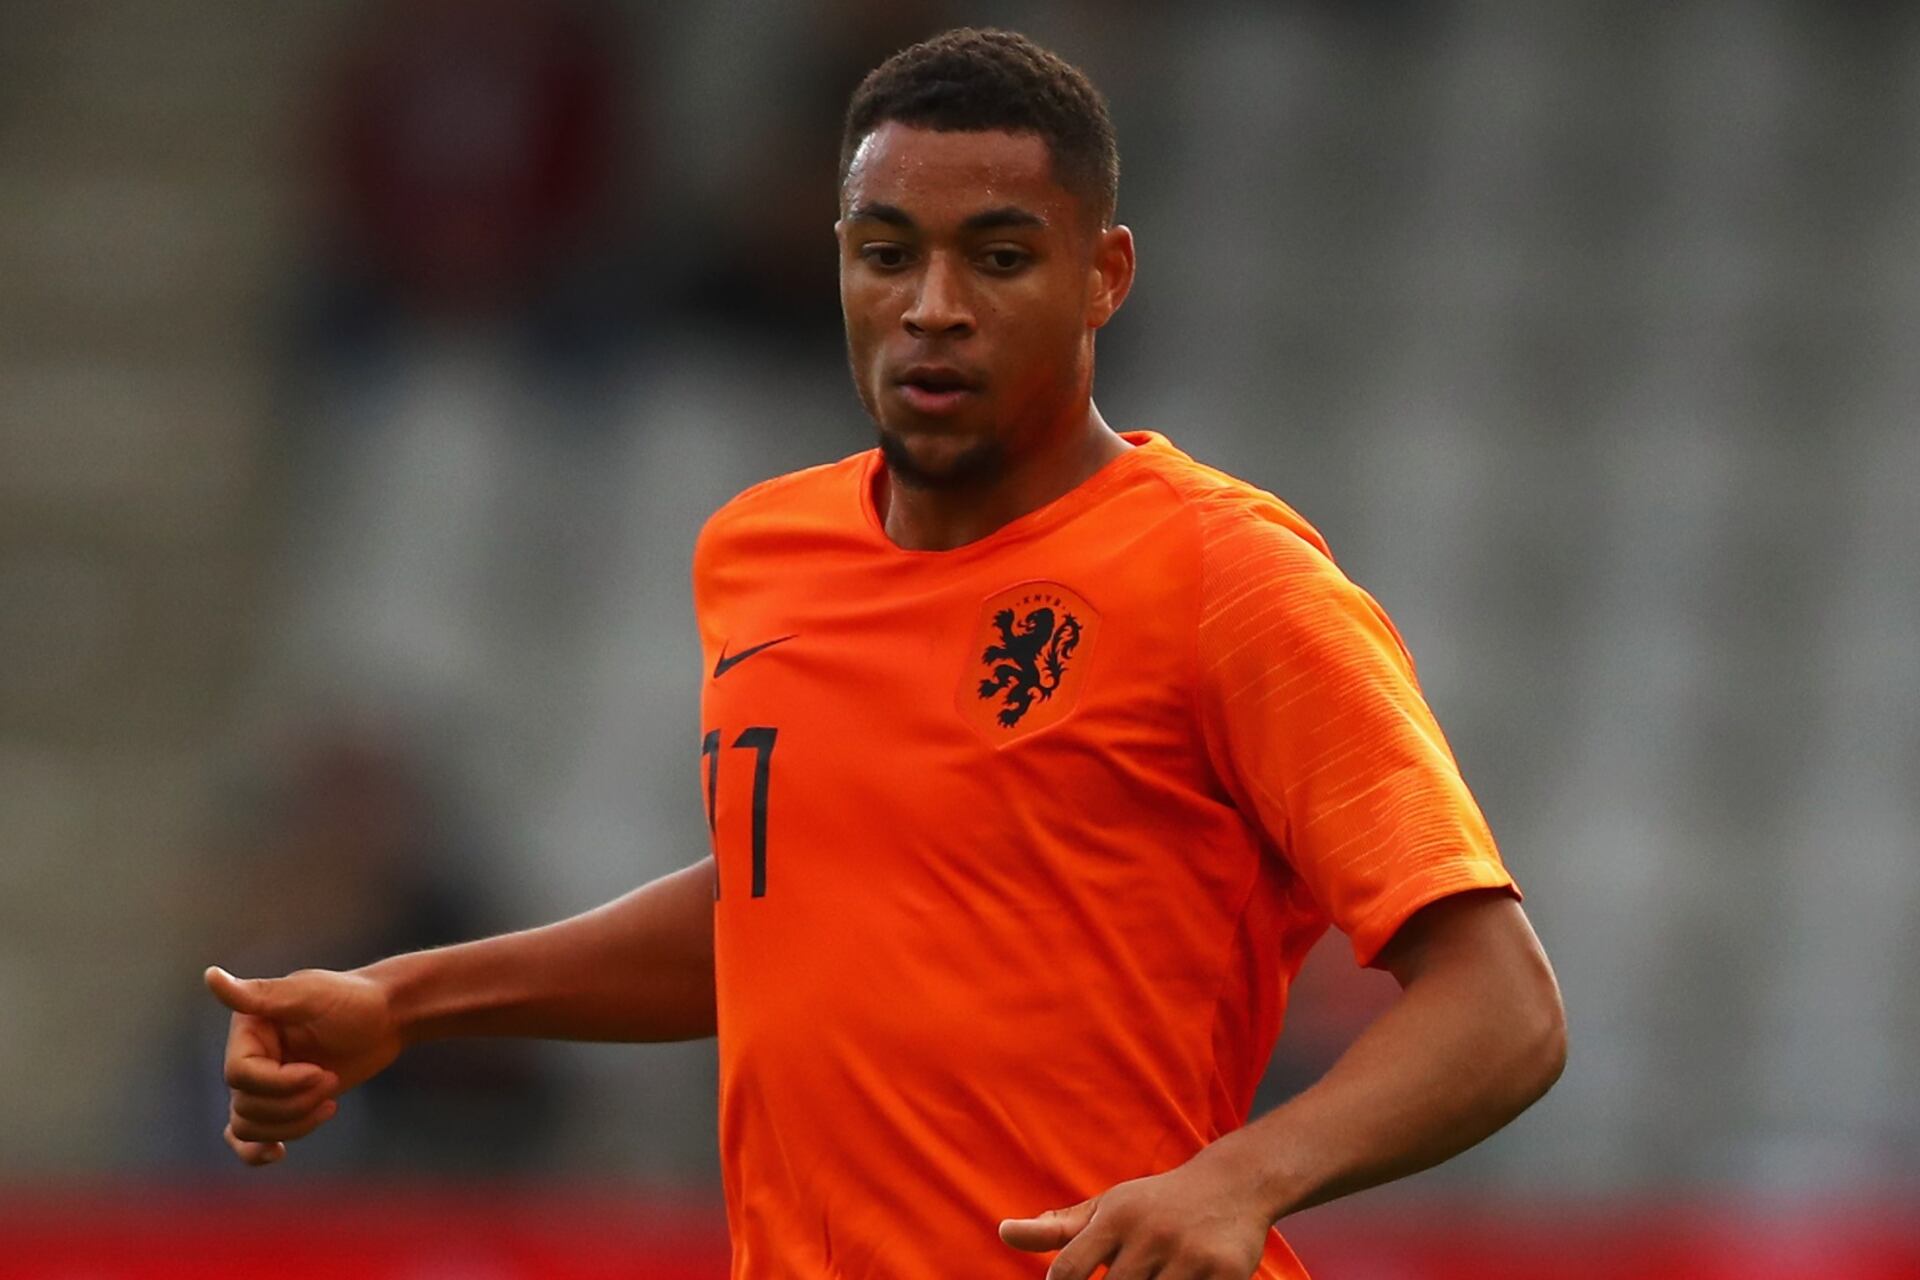 Liverpool want him for £35m and he scored in Netherlands victory